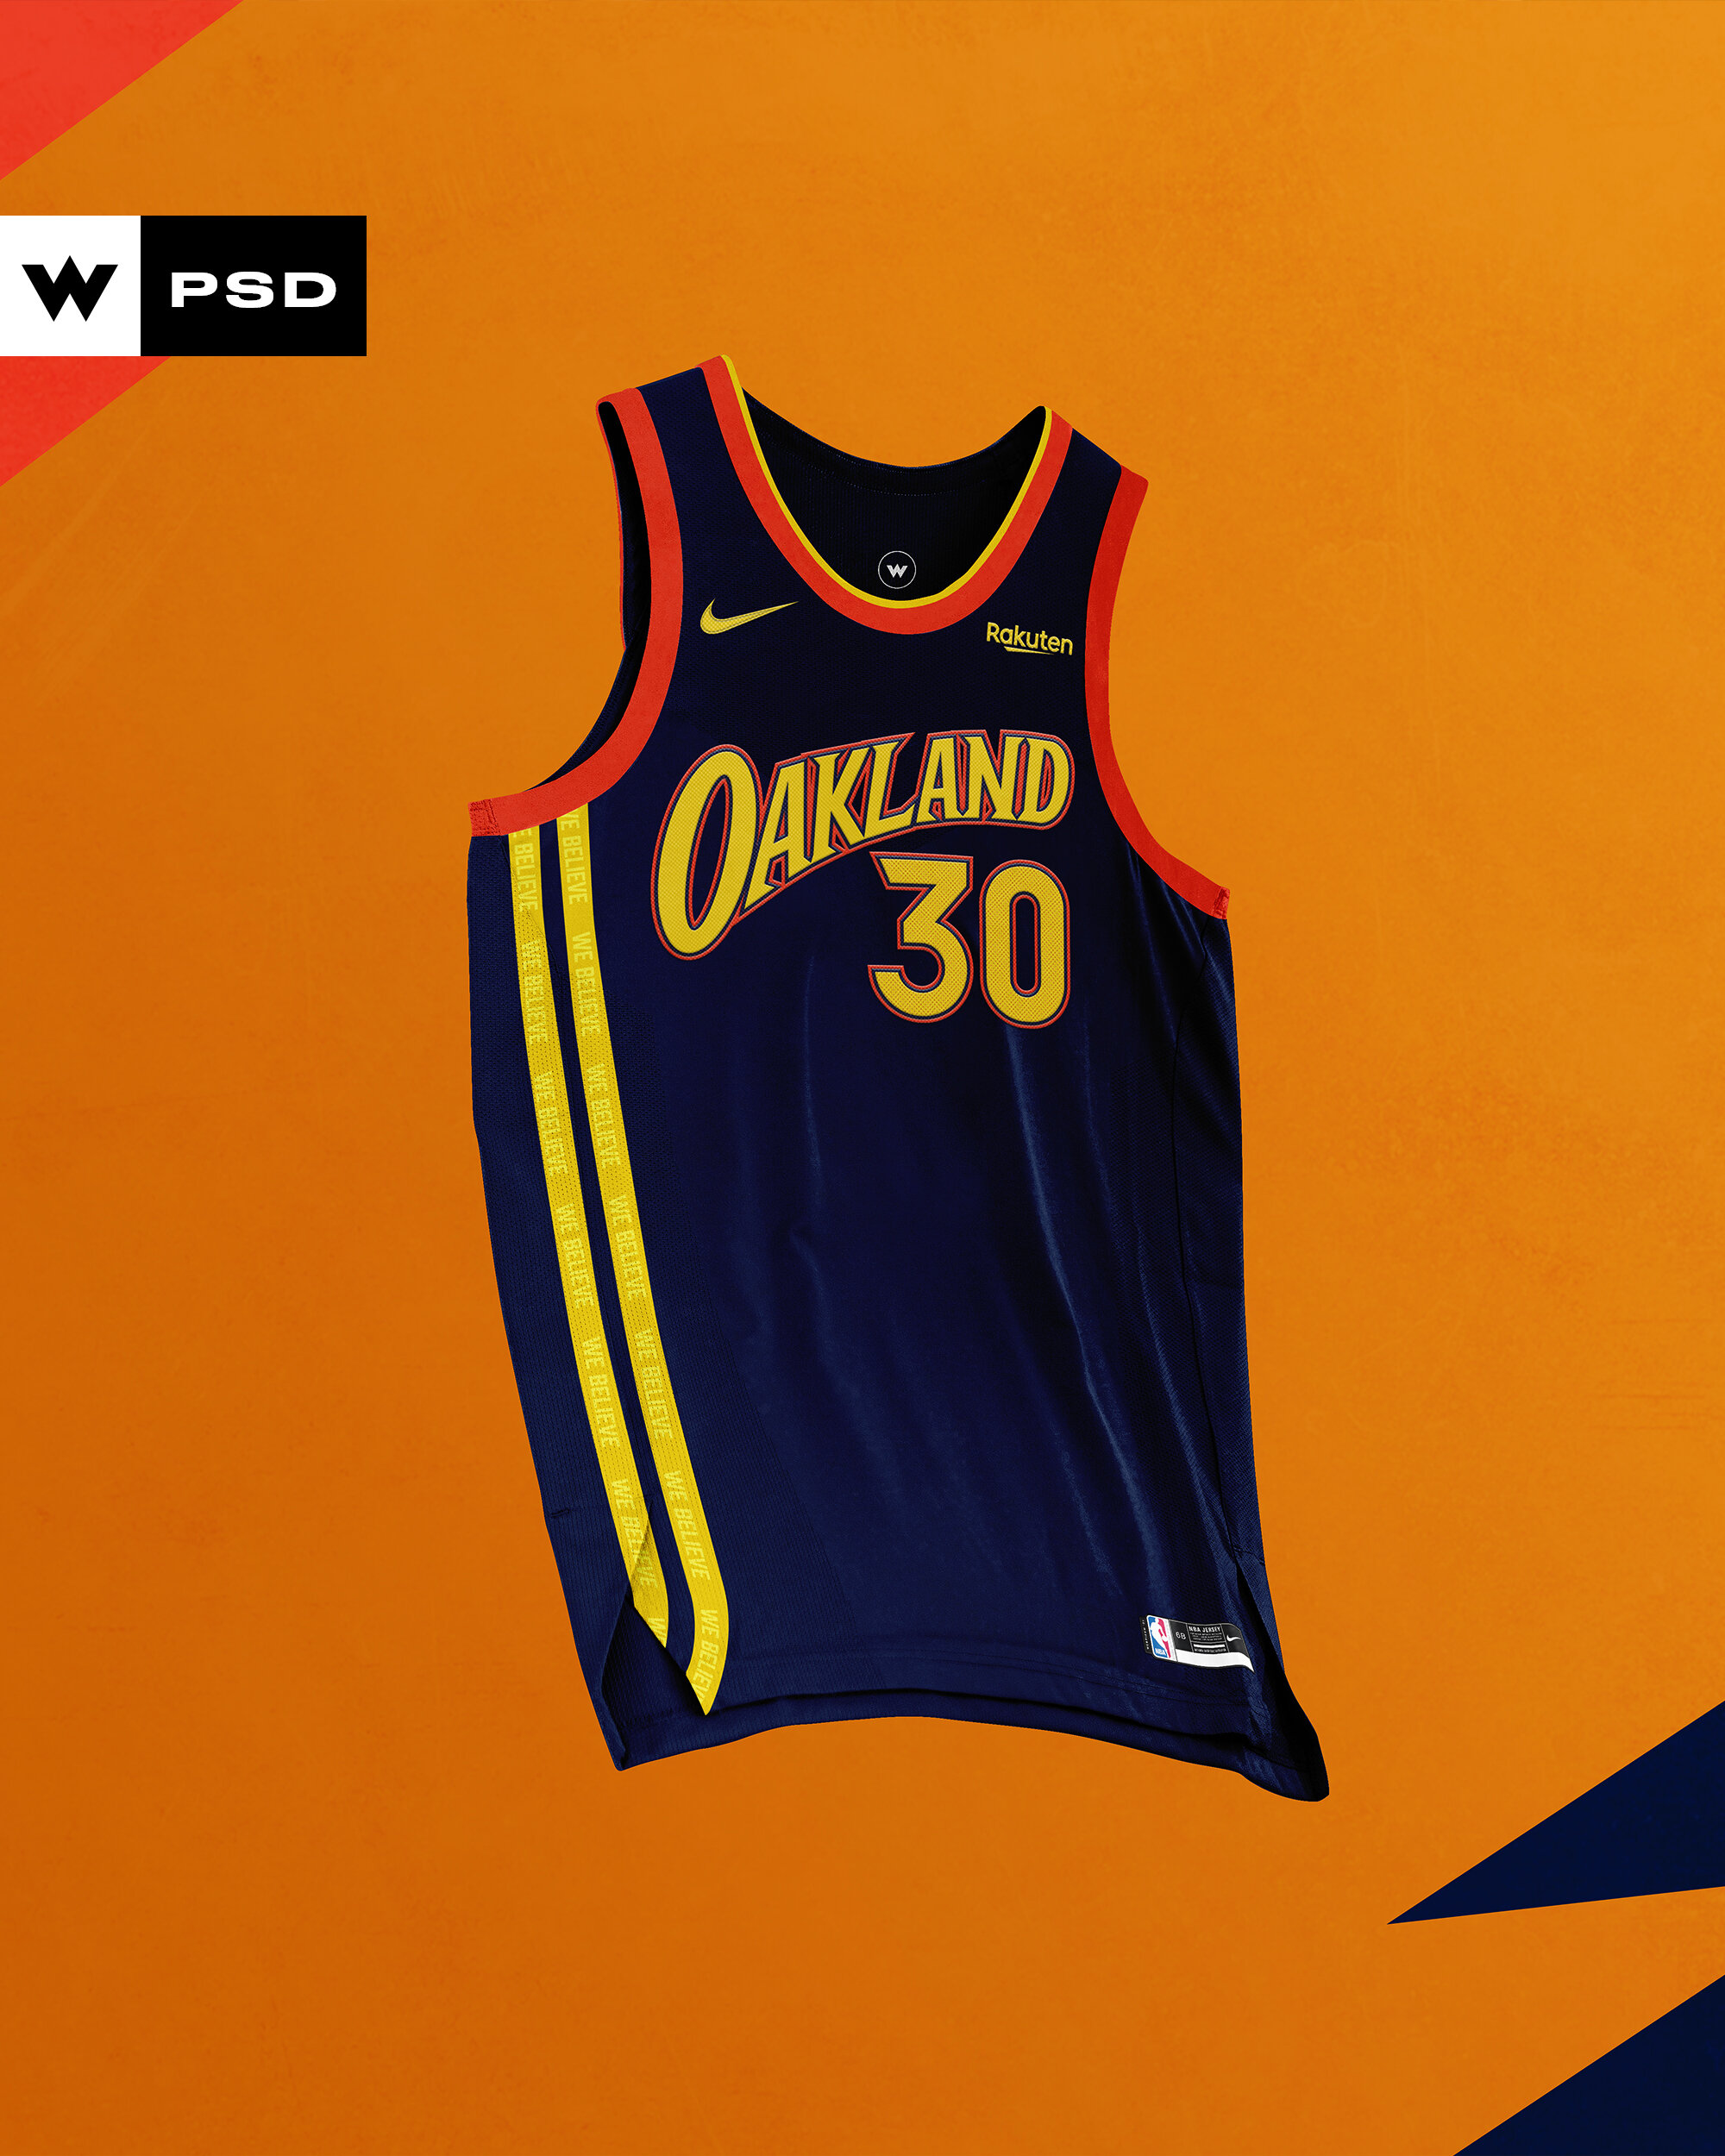 Free Basketball Jersey Mockup Pack in PSD Format for Photoshop